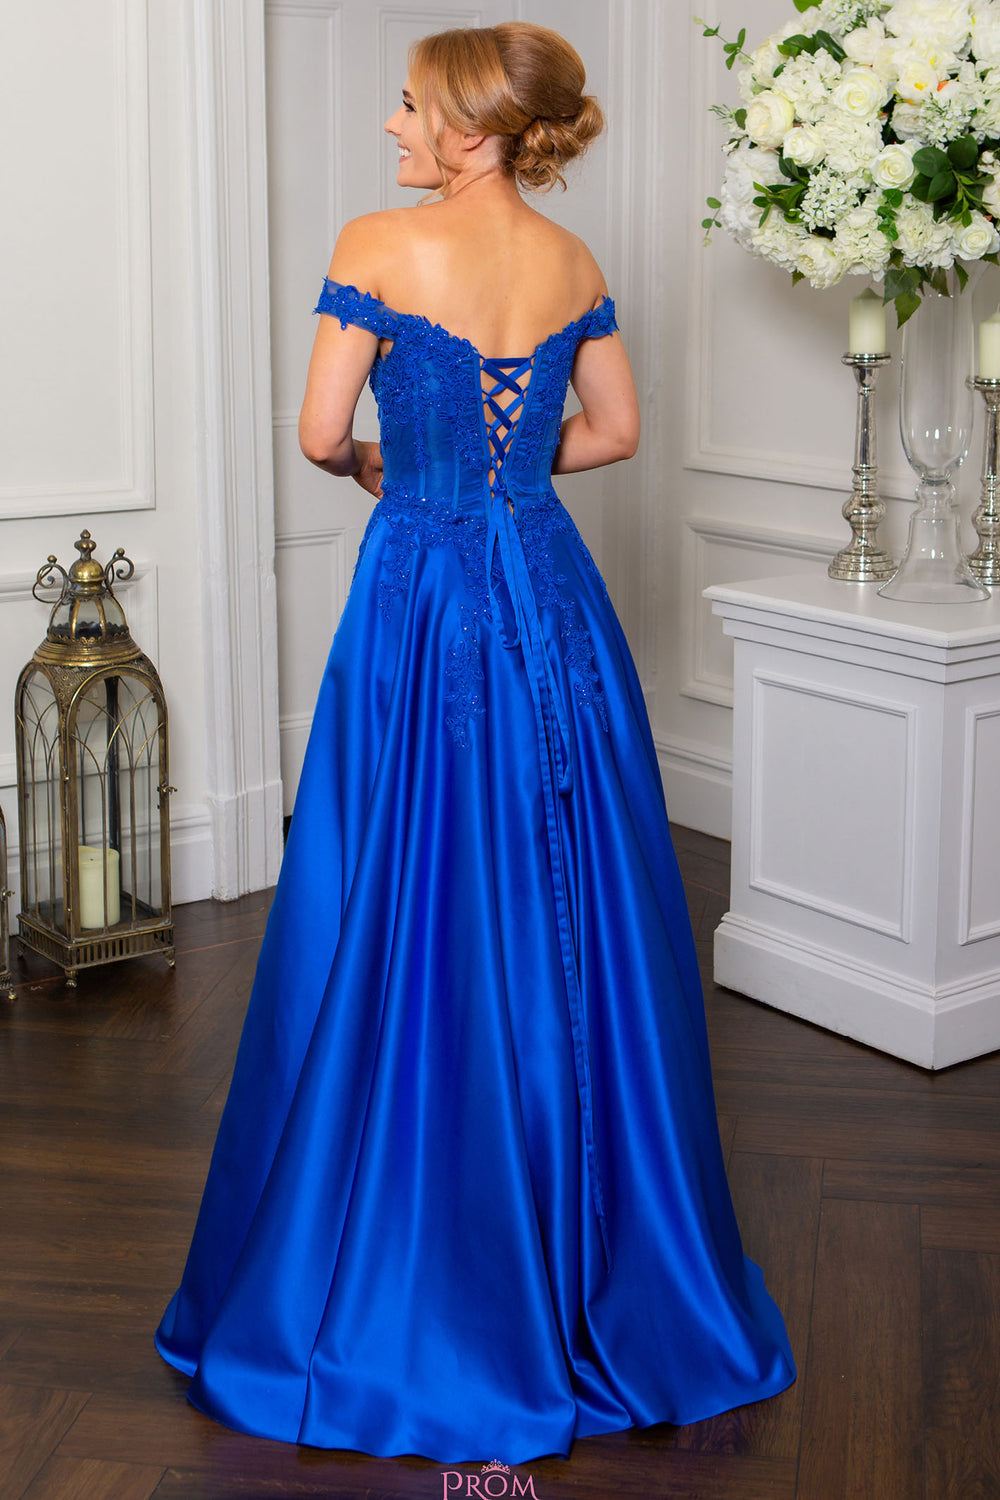 Prom Frocks PF9603 Royal Blue Satin Prom Dress - Dotique Chesterfield